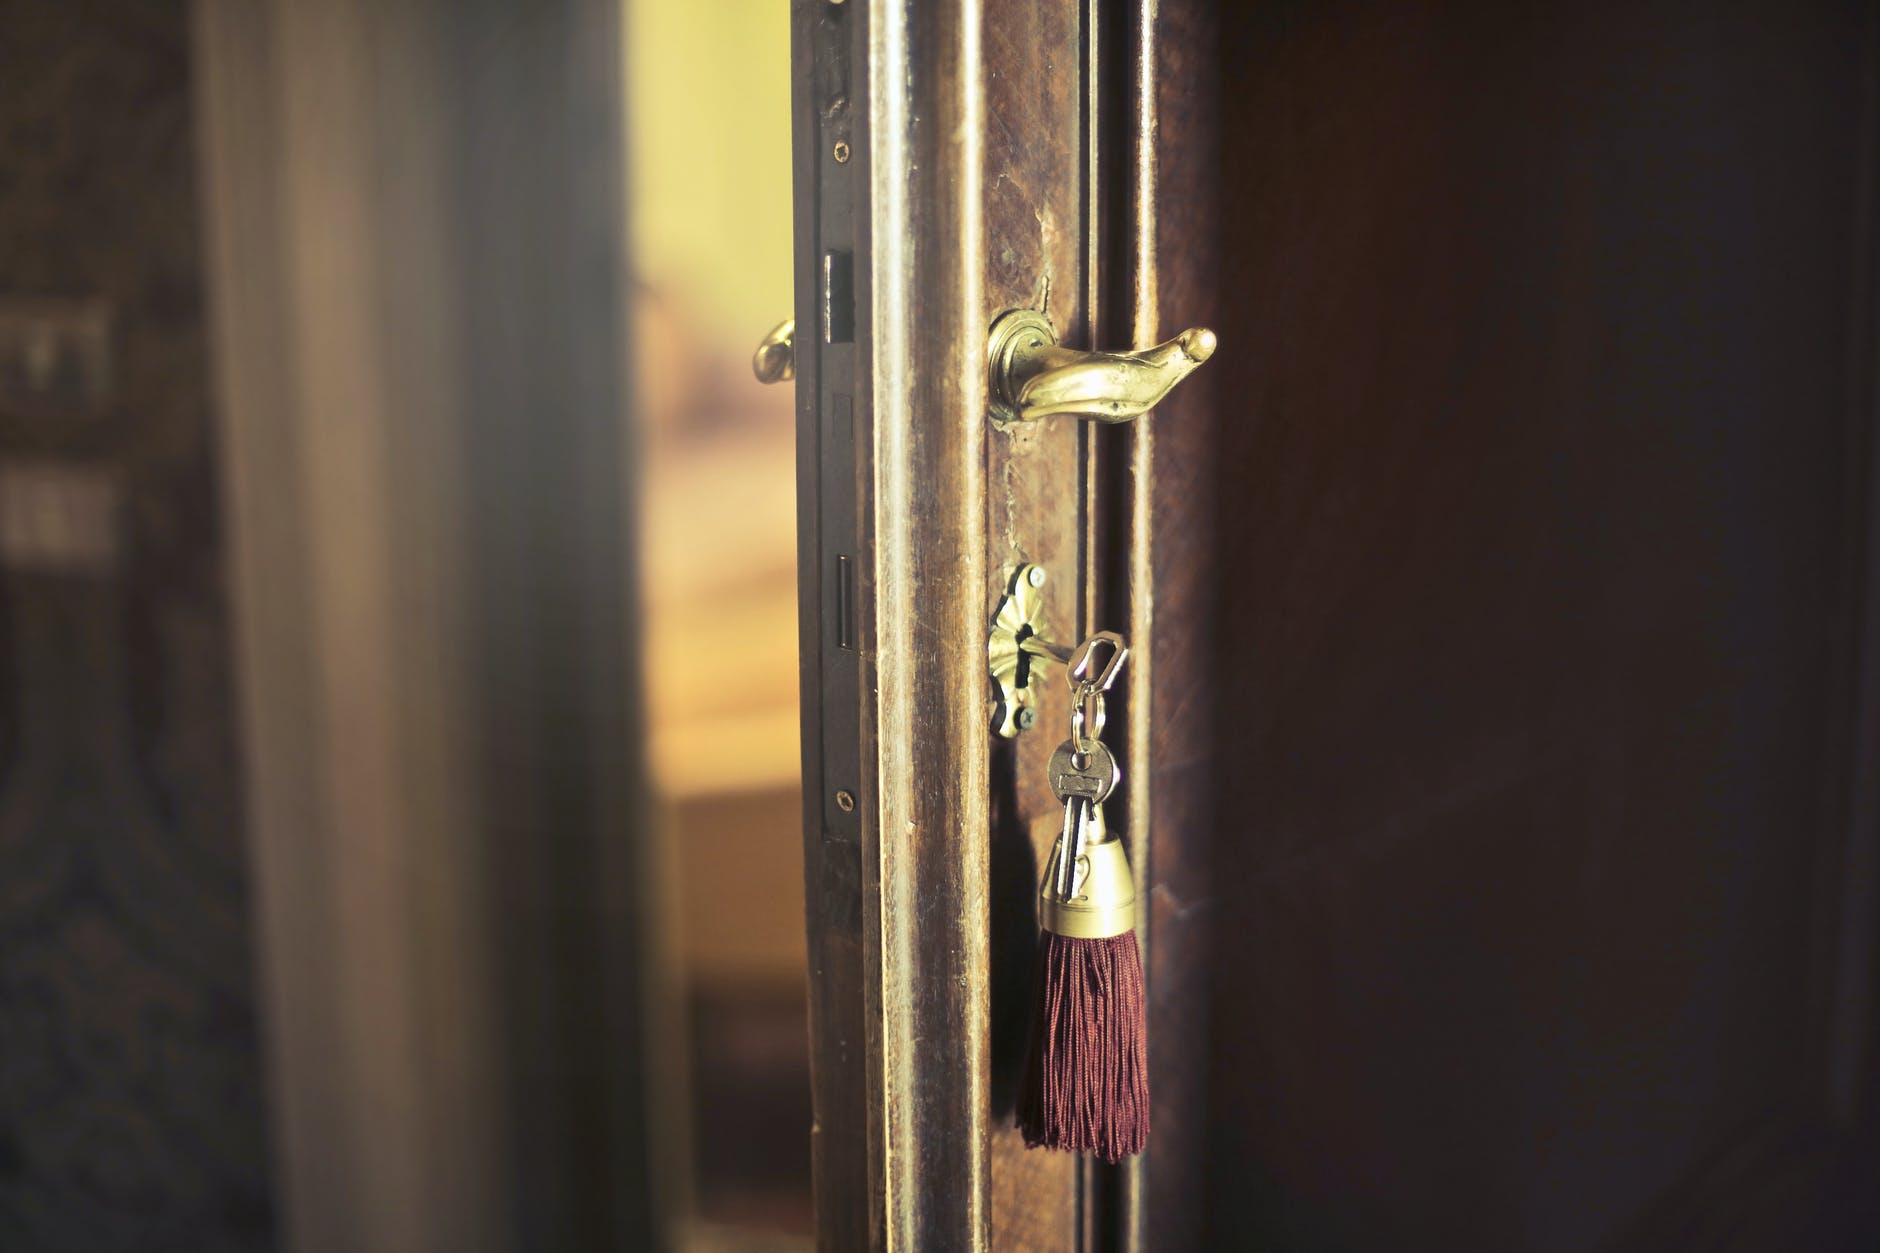 Mrs. Gardner locked her in a room and didn't allow me to see her. | Source: Pexels